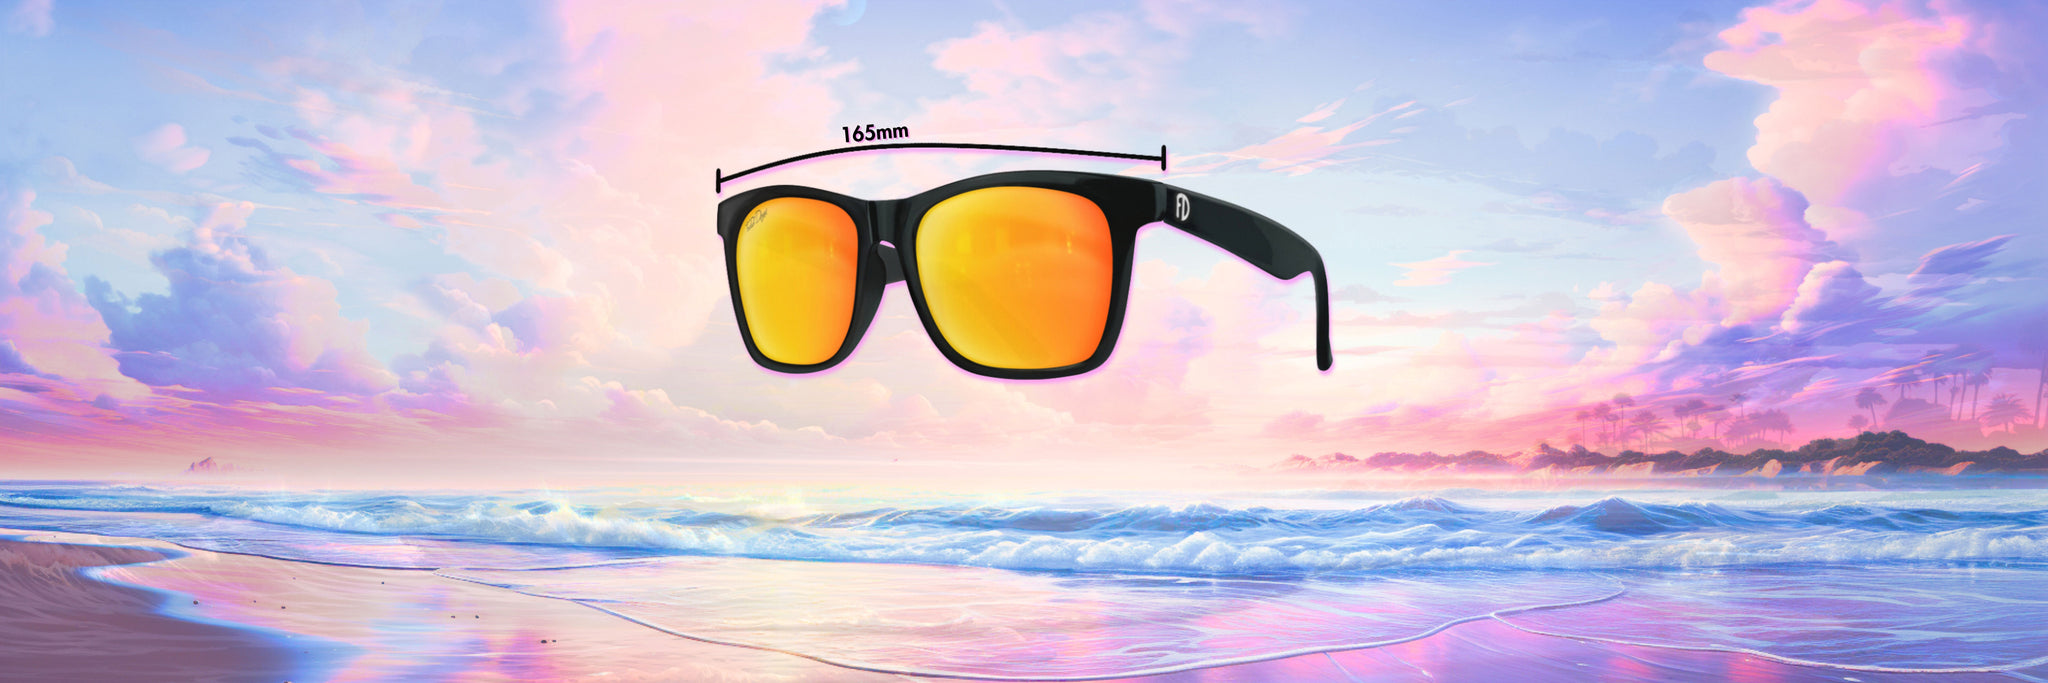 Sunglasses for XXL, Big, Wide or Large Heads and Faces – Faded